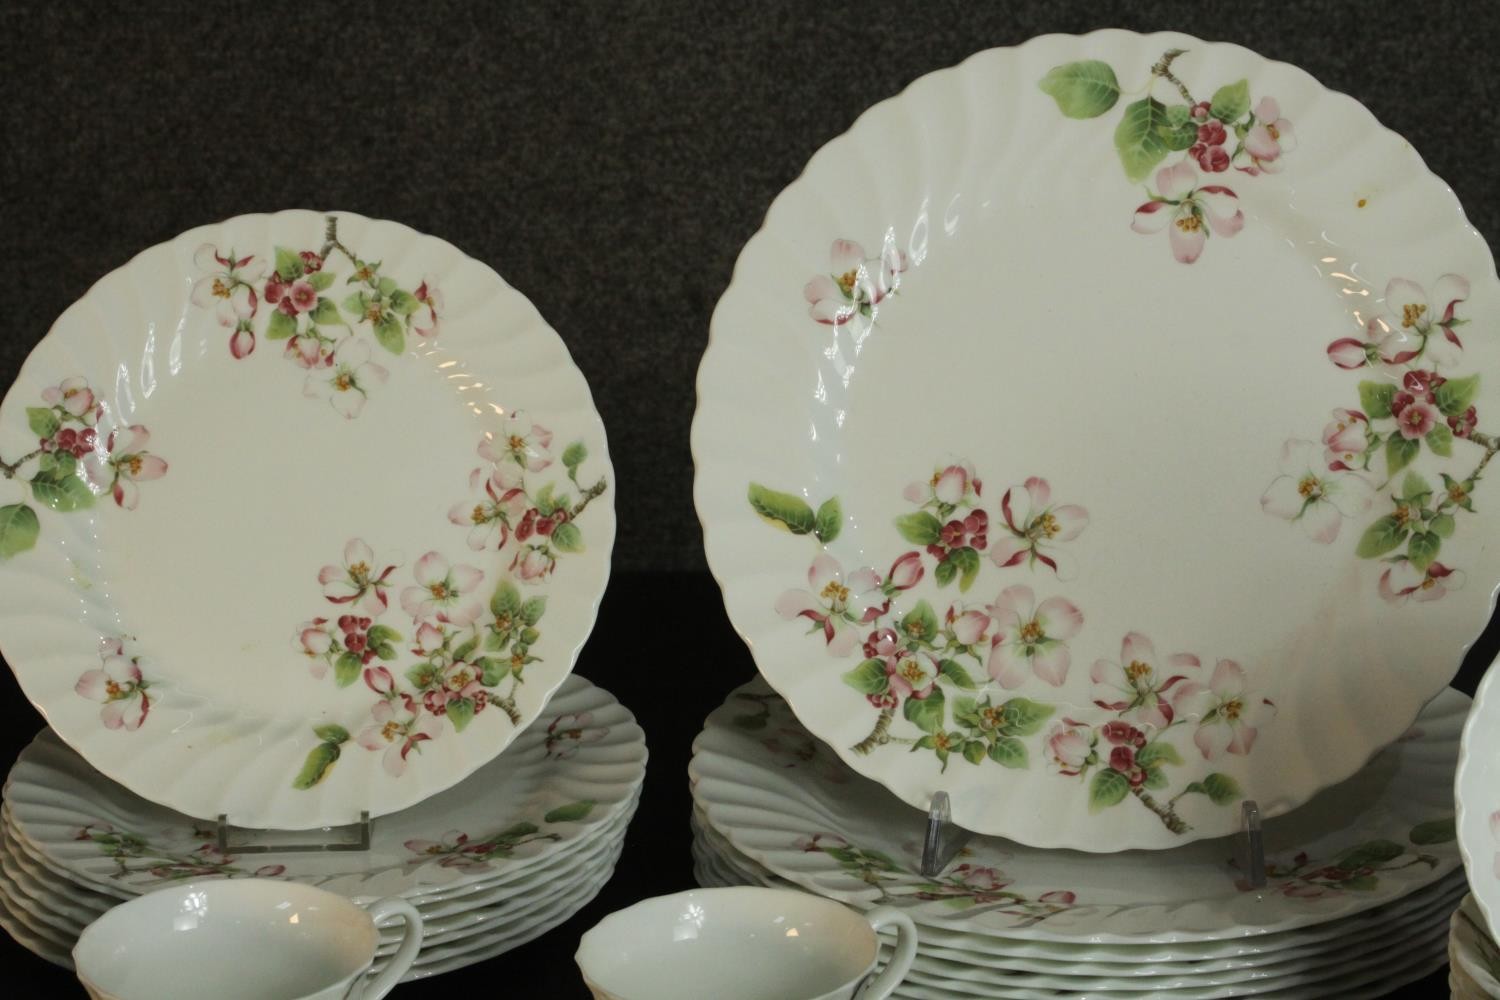 A 20th century Wedgwood Apple Blossom dinner and tea set (one cup missing) 47pieces. Largest piece - Image 4 of 14